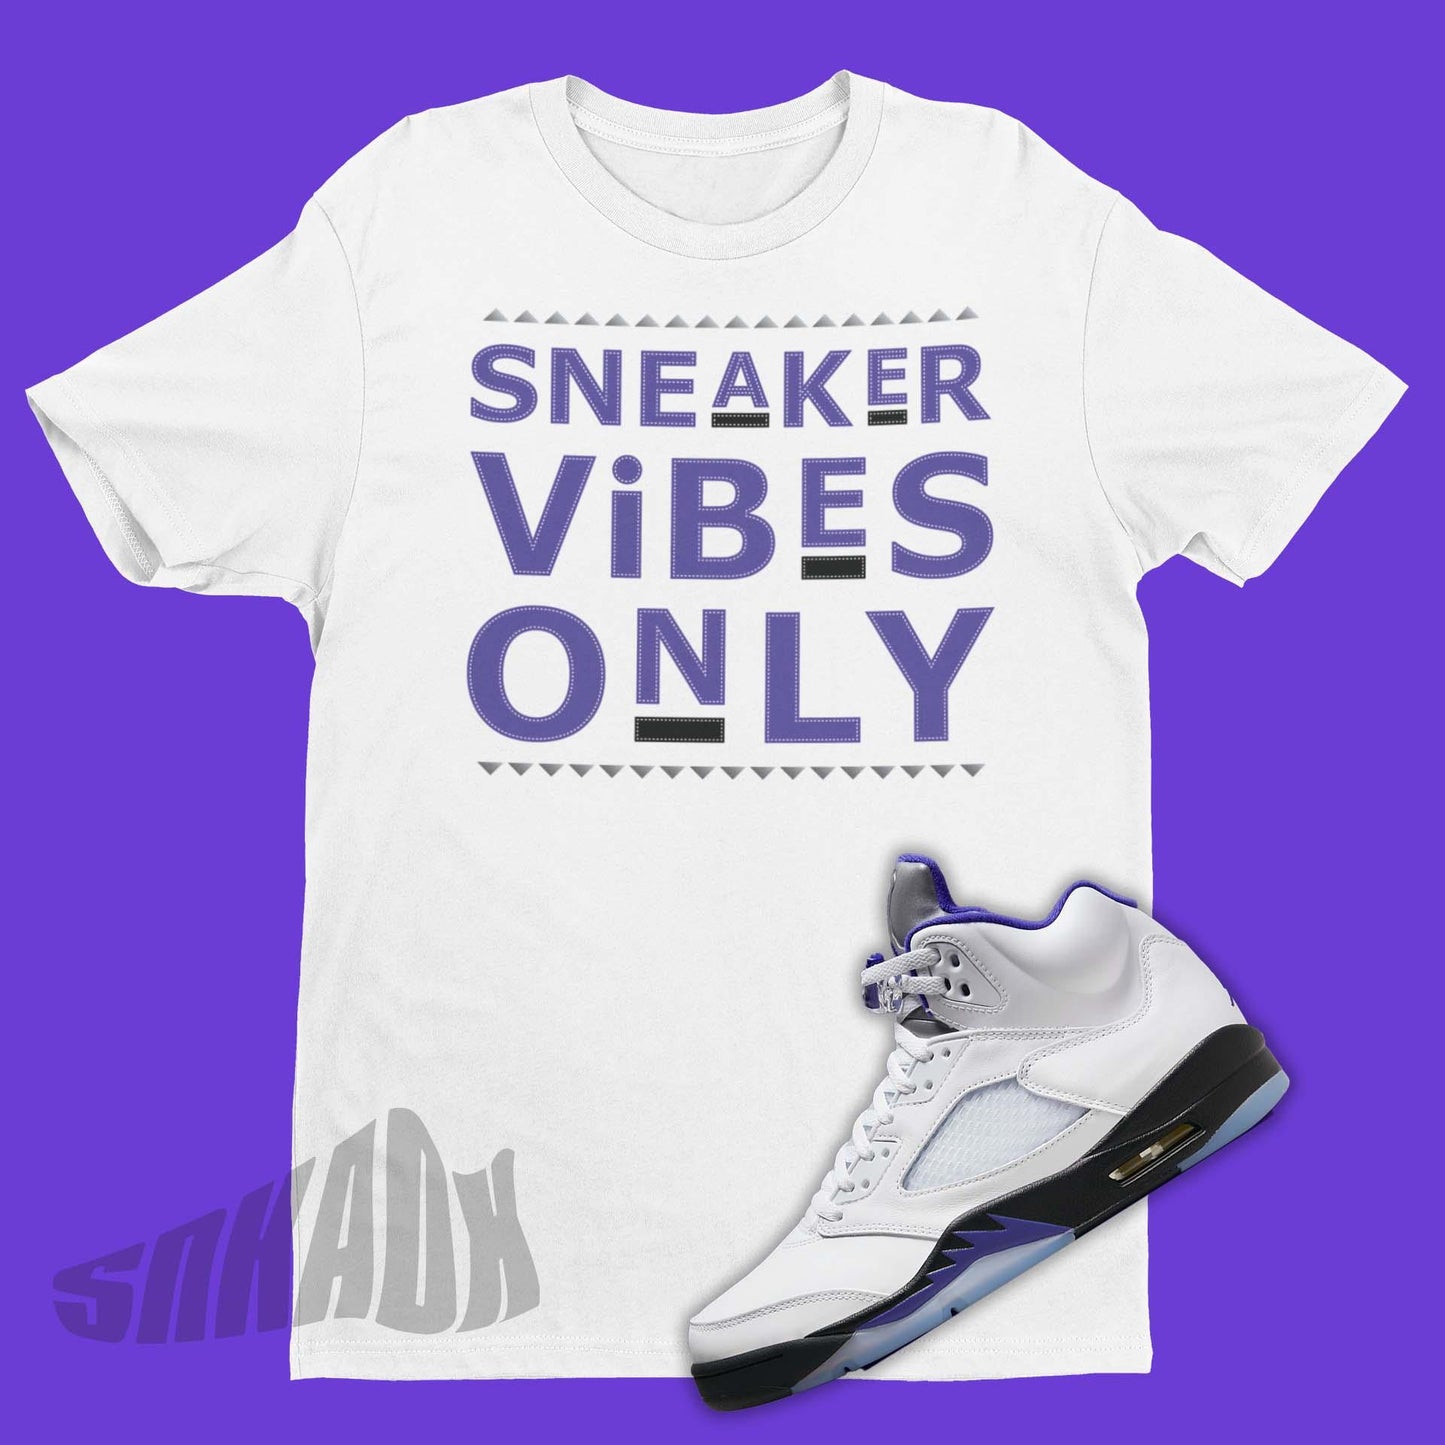 Sneaker Vibes Only Shirt To Match Air Jordan 5 Concord - SNKADX